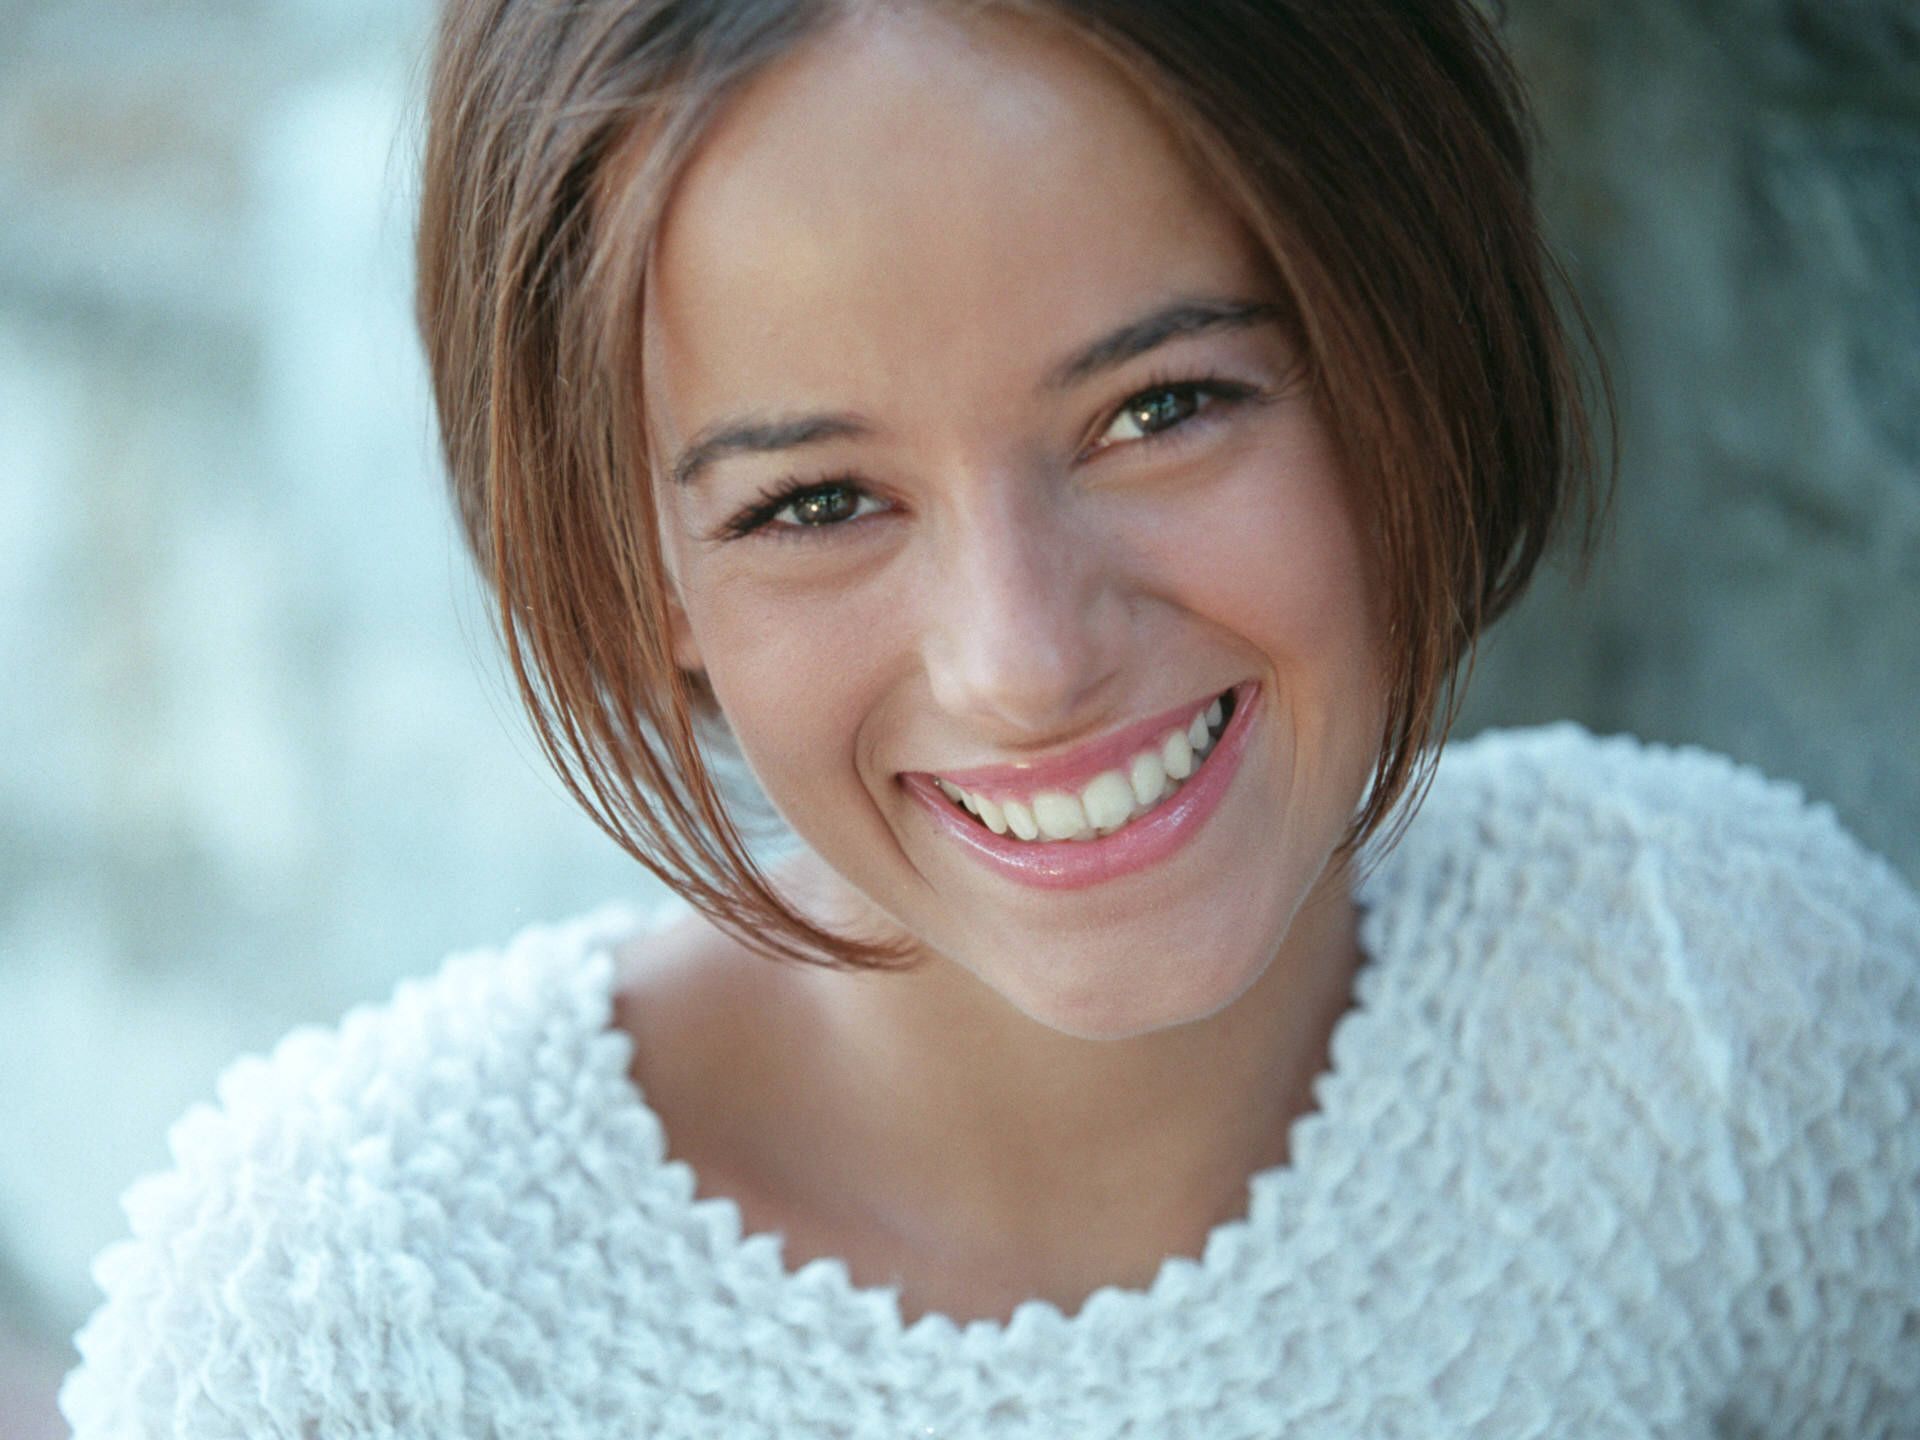 Alizee French Singer Beautiful Girl Wallpapers Hd Wallpapers 86736